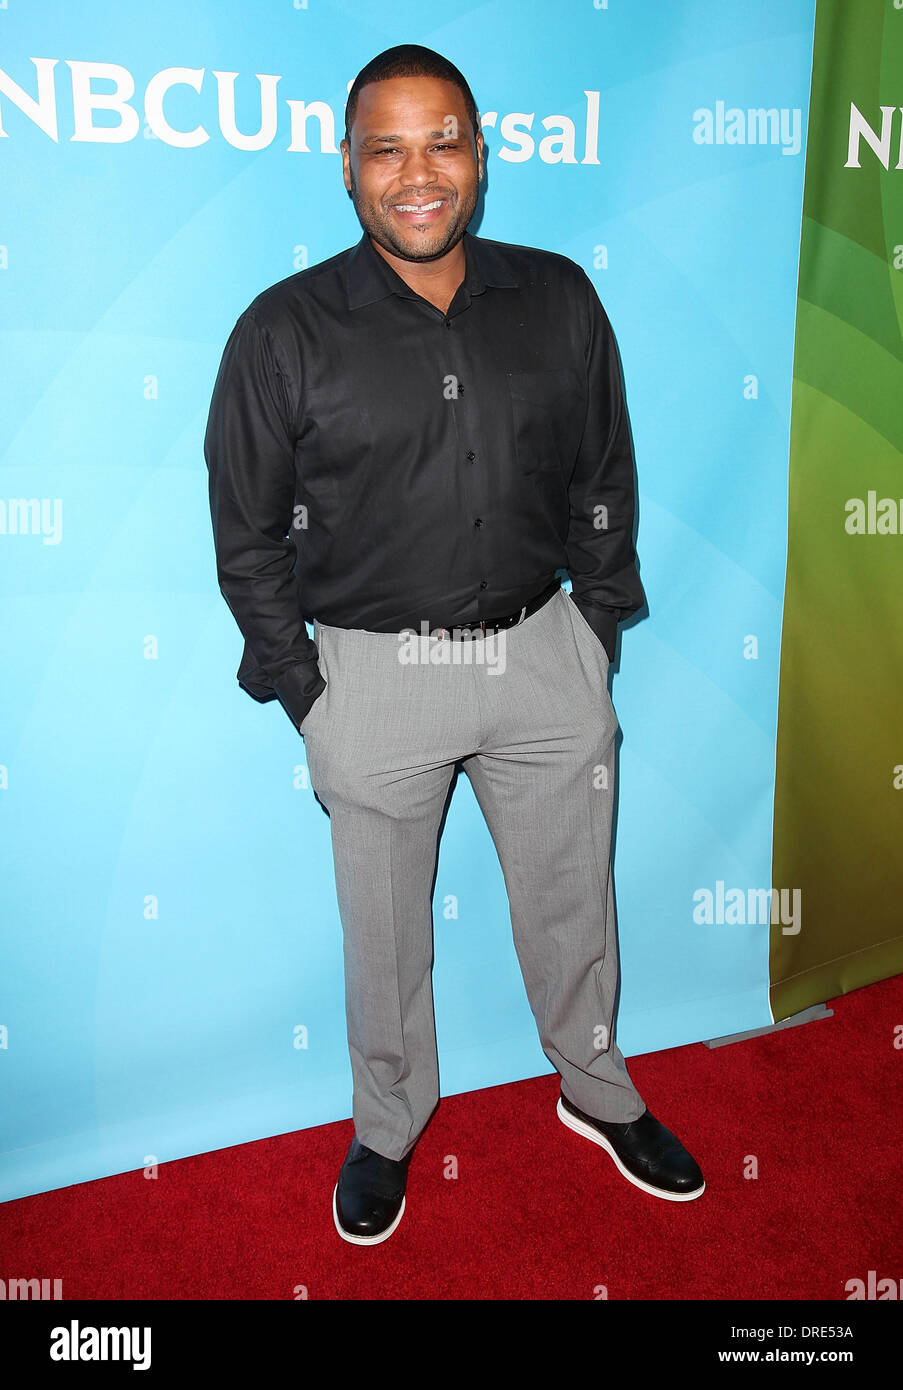 Anthony Anderson NBC Universal Press Tour at Beverly Hilton Hotel Beverly Hills, California - 24.07.12 Stock Photo